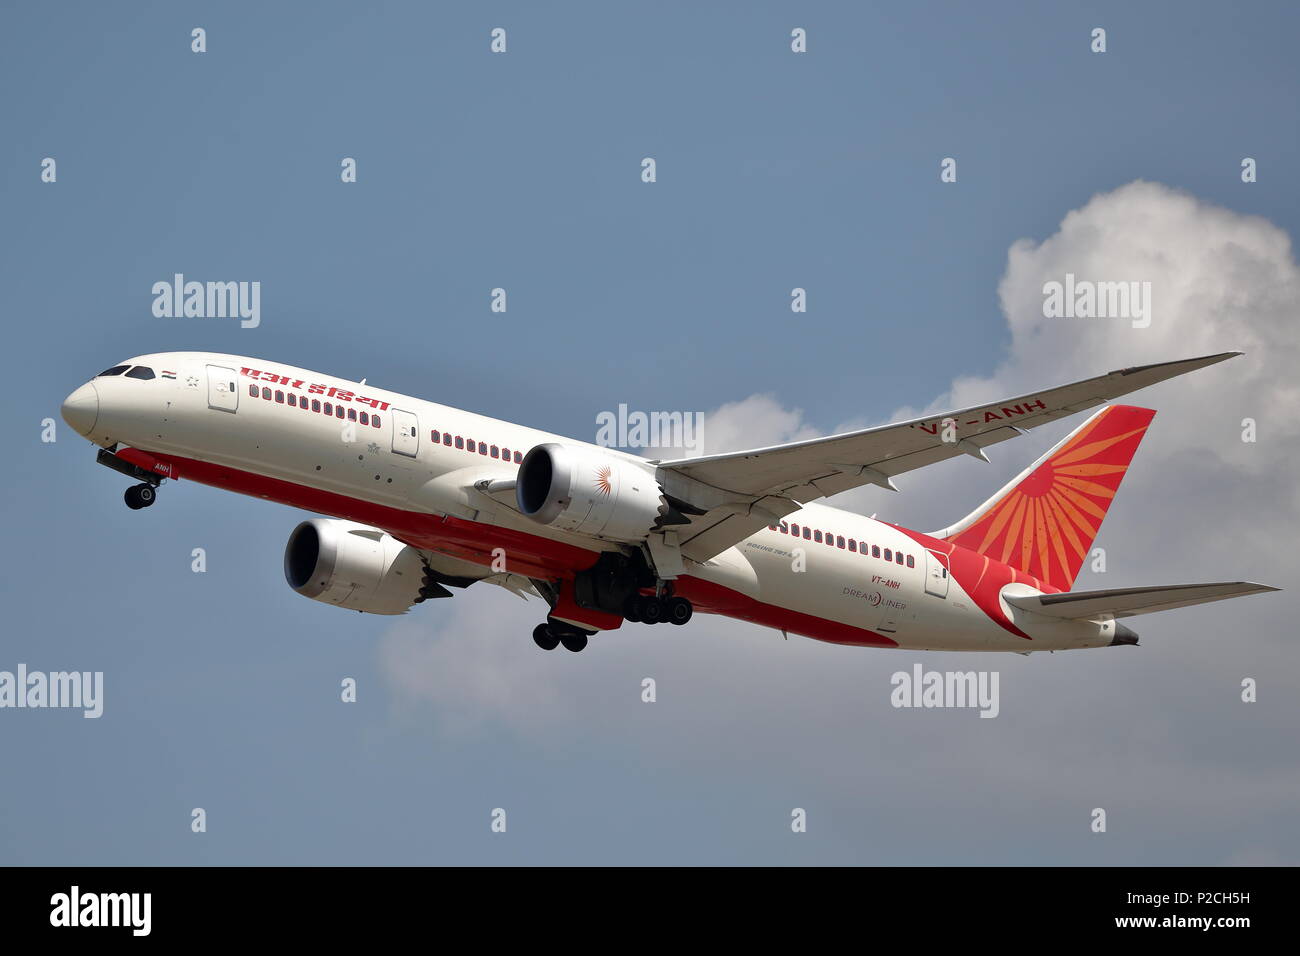 Air India Boeing 787-8 Dreamliner VT-ANH taking off from London Heathrow Airport, UK Stock Photo